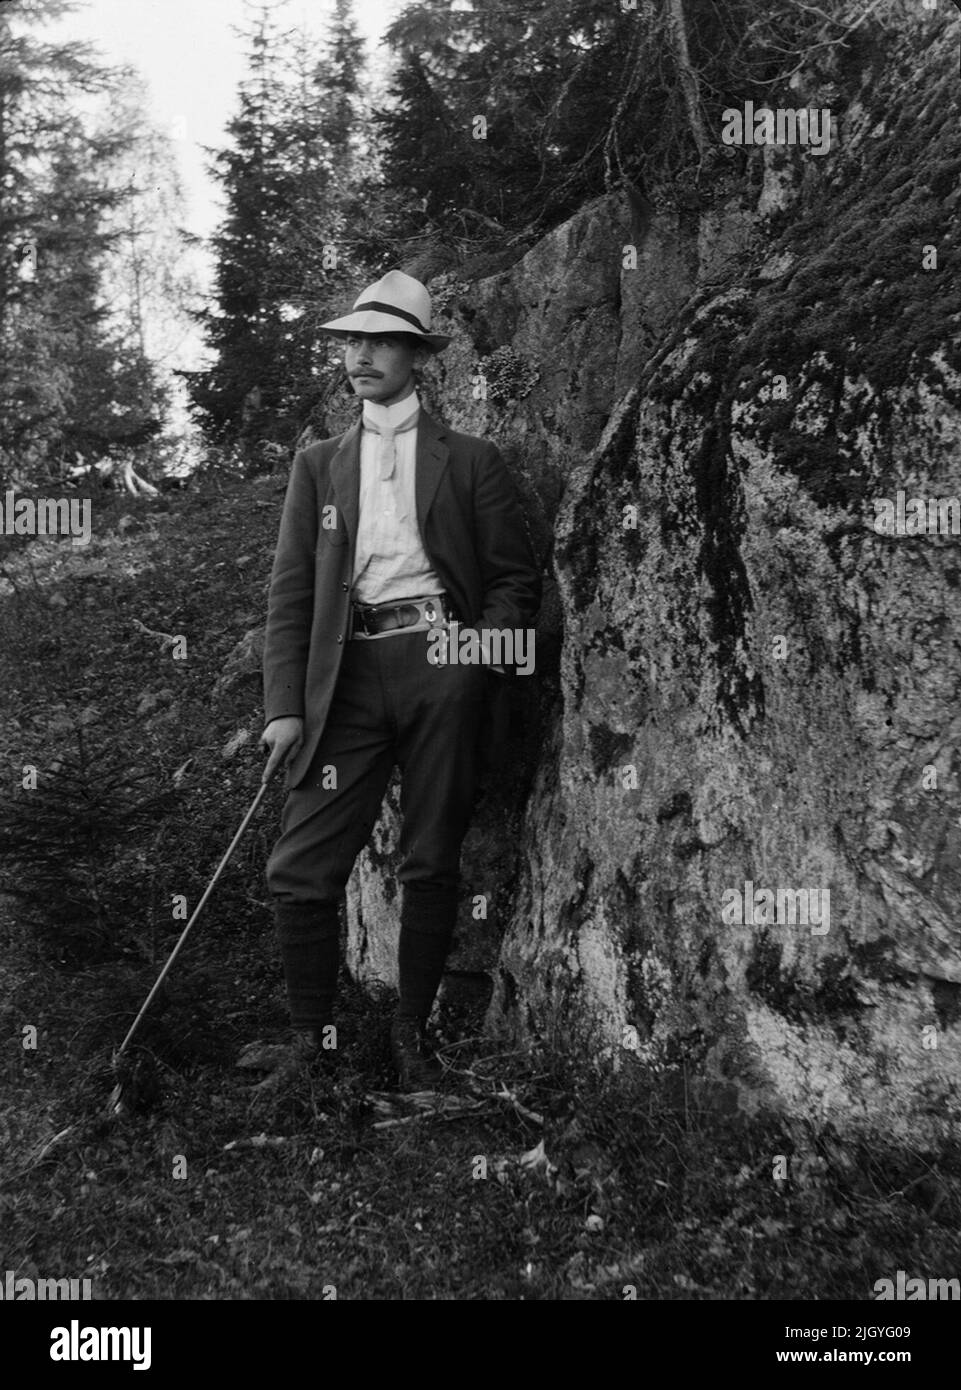 Josef Ärnström in the forest. Josef Ärnström's image collection was acquired by the Upplands Museum 2011.Josef Ärnström was born in 1887 in Keps, Hållnäs parish, Uppland. He was married to Nora Selldin, born in Timrå, Medelpad. Both Josef and his wife Nora took their degrees around 1910 at the teacher's seminar in Uppsala. In Medelpad, the couple received their first teacher services at Berge school as a newlyweds about 1910-12. The relocation then moved on to Lapland where Josef was employed in Toulleuvaara between about 1913-18. Joseph ended his career as an exercise teacher from about 1920 Stock Photo